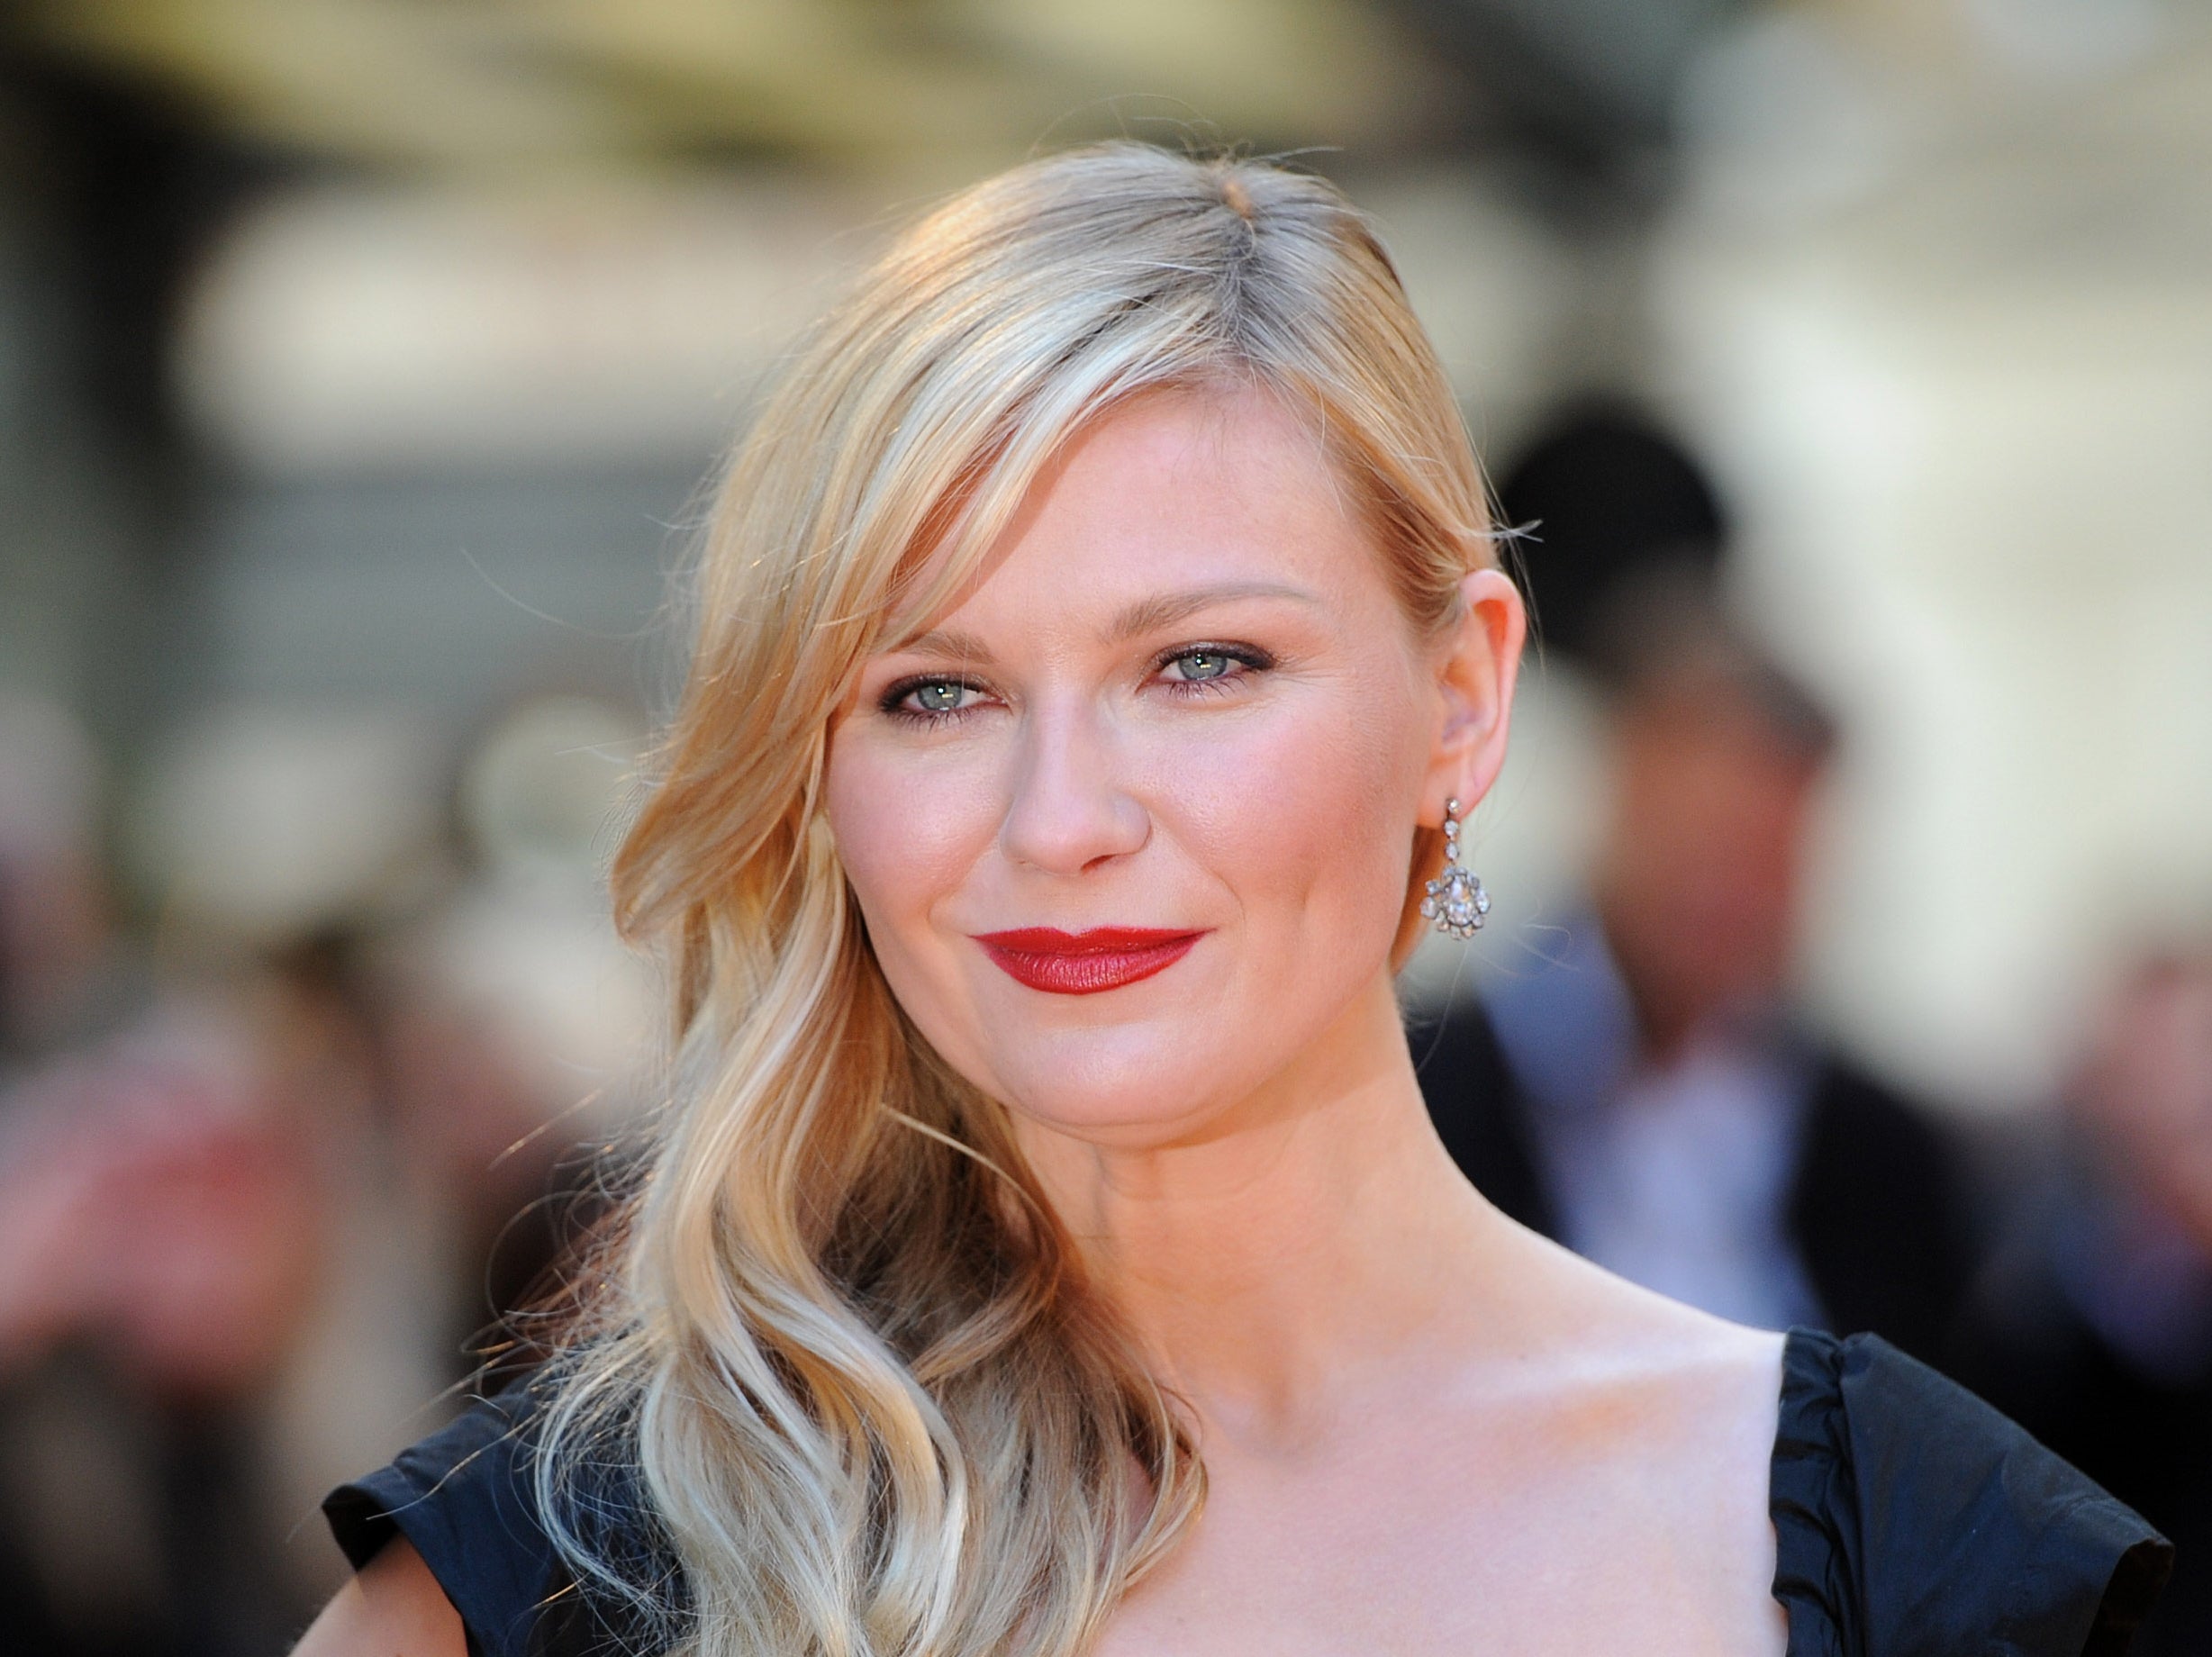 Dunst said Pitt ‘was like a brother’ to her on set of ‘Interview With the Vampire’